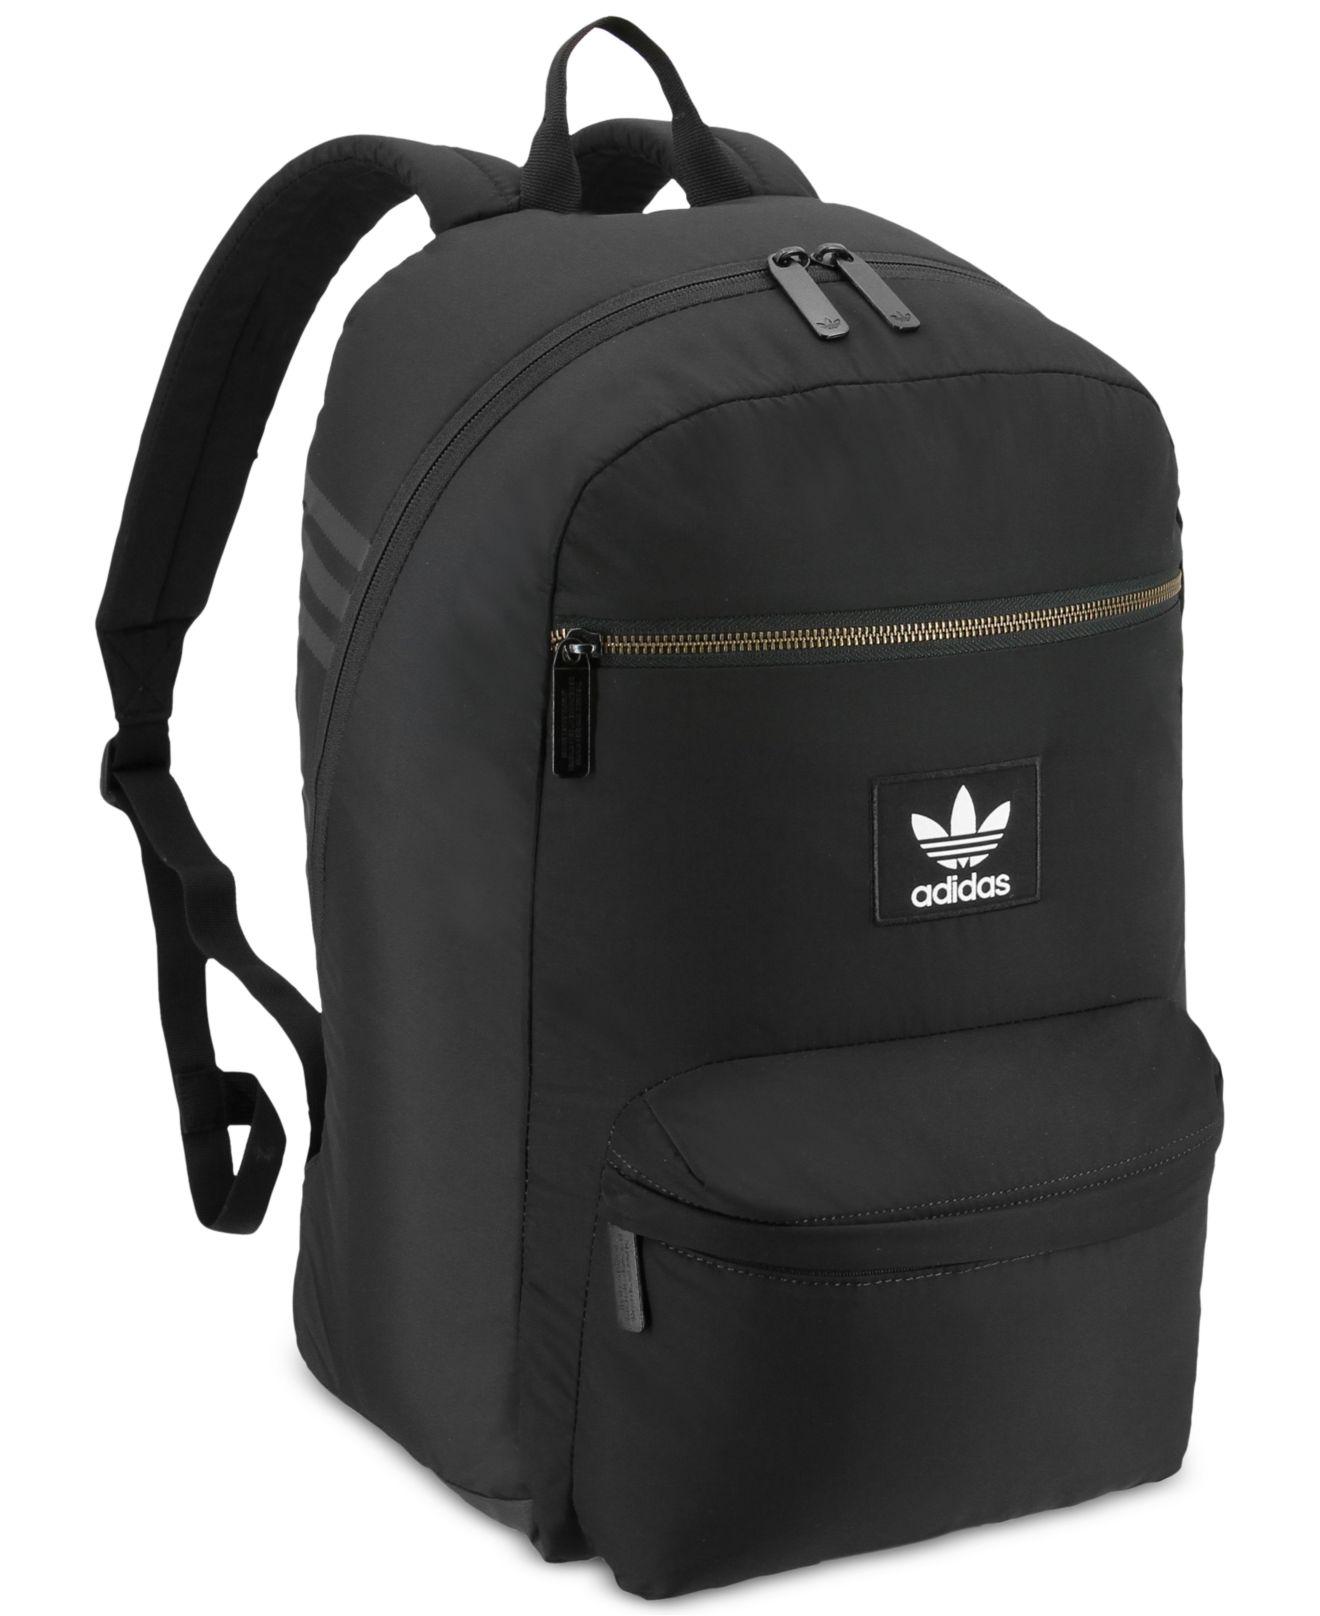 adidas Synthetic Originals National Plus Backpack in Black for Men - Lyst